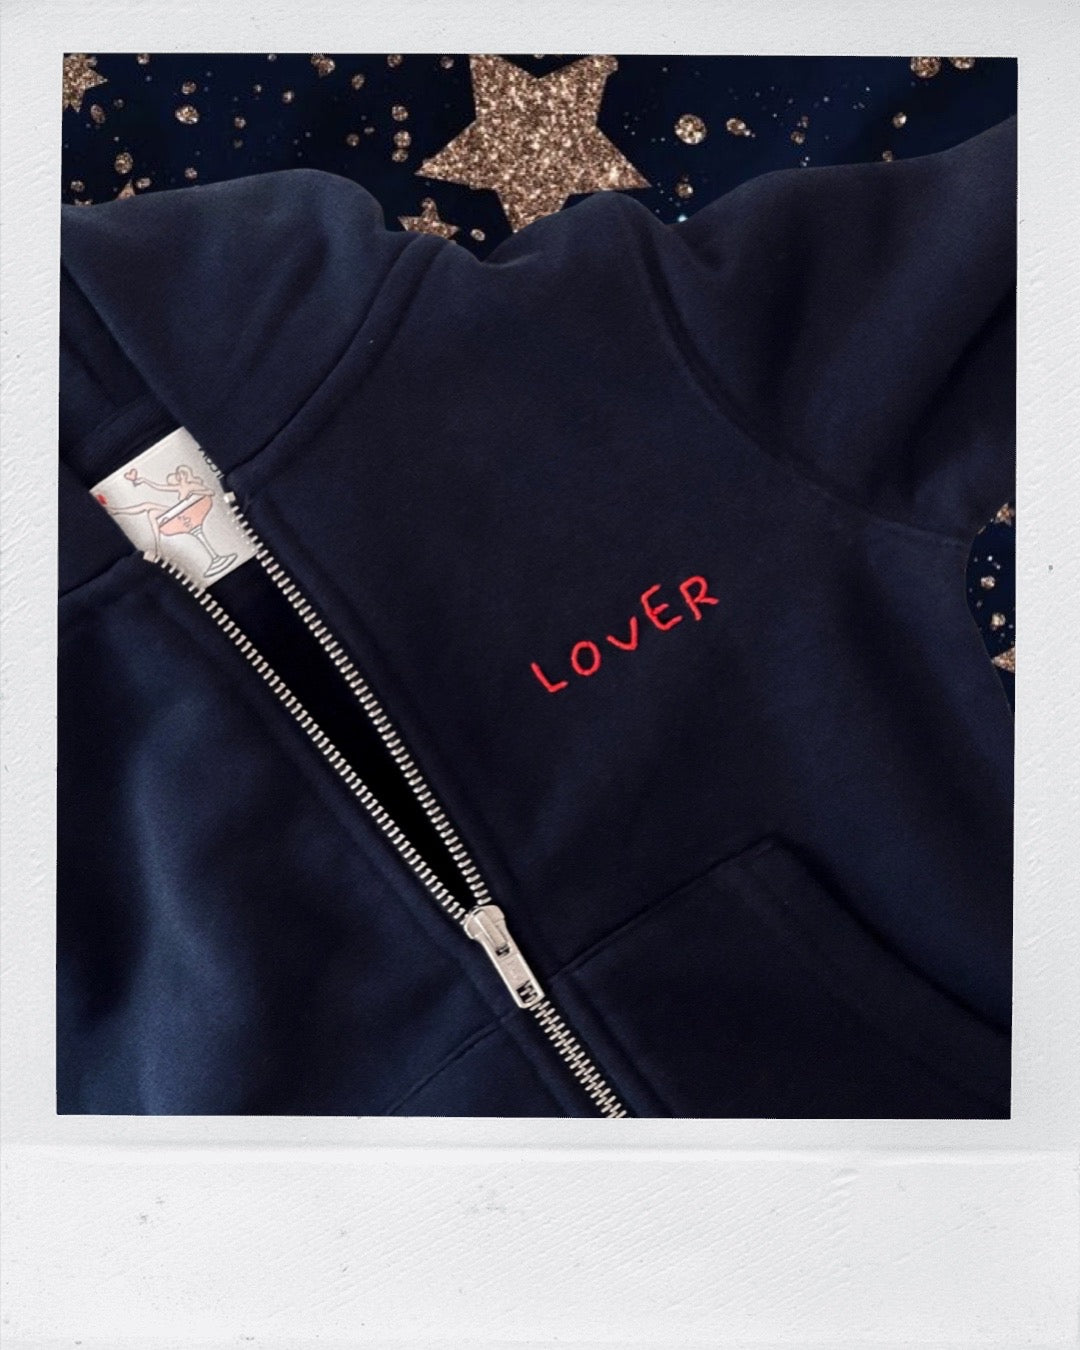 Lover - a sweatshirt for Fedorami little lovers